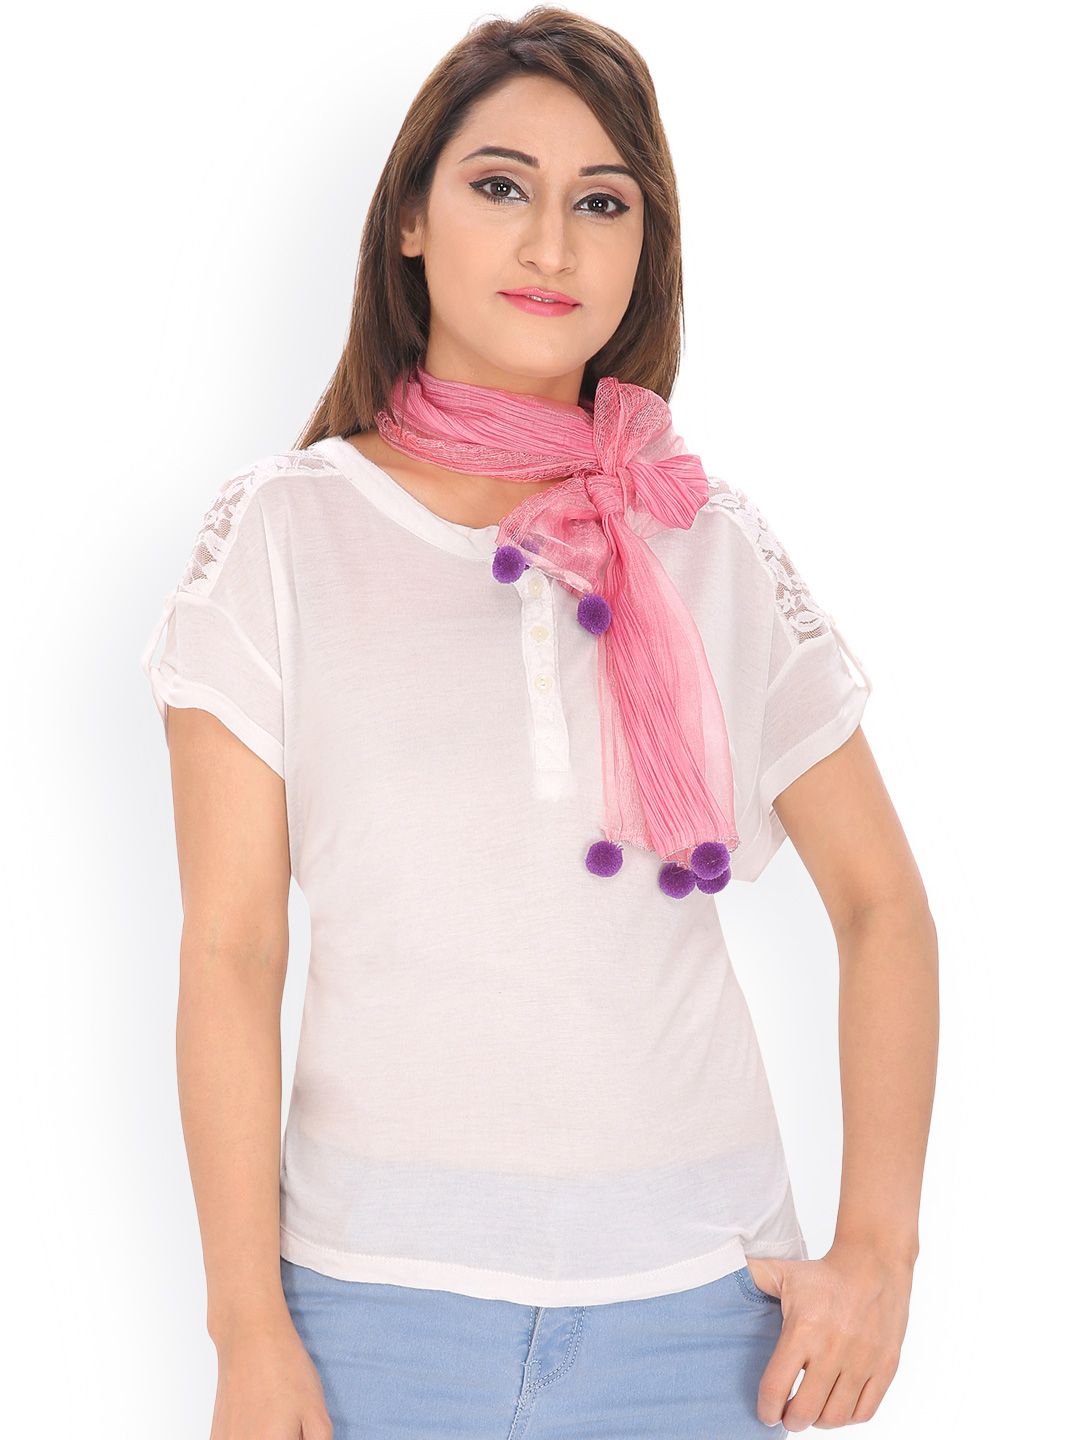 Anekaant Pink Striped Scarf Price in India